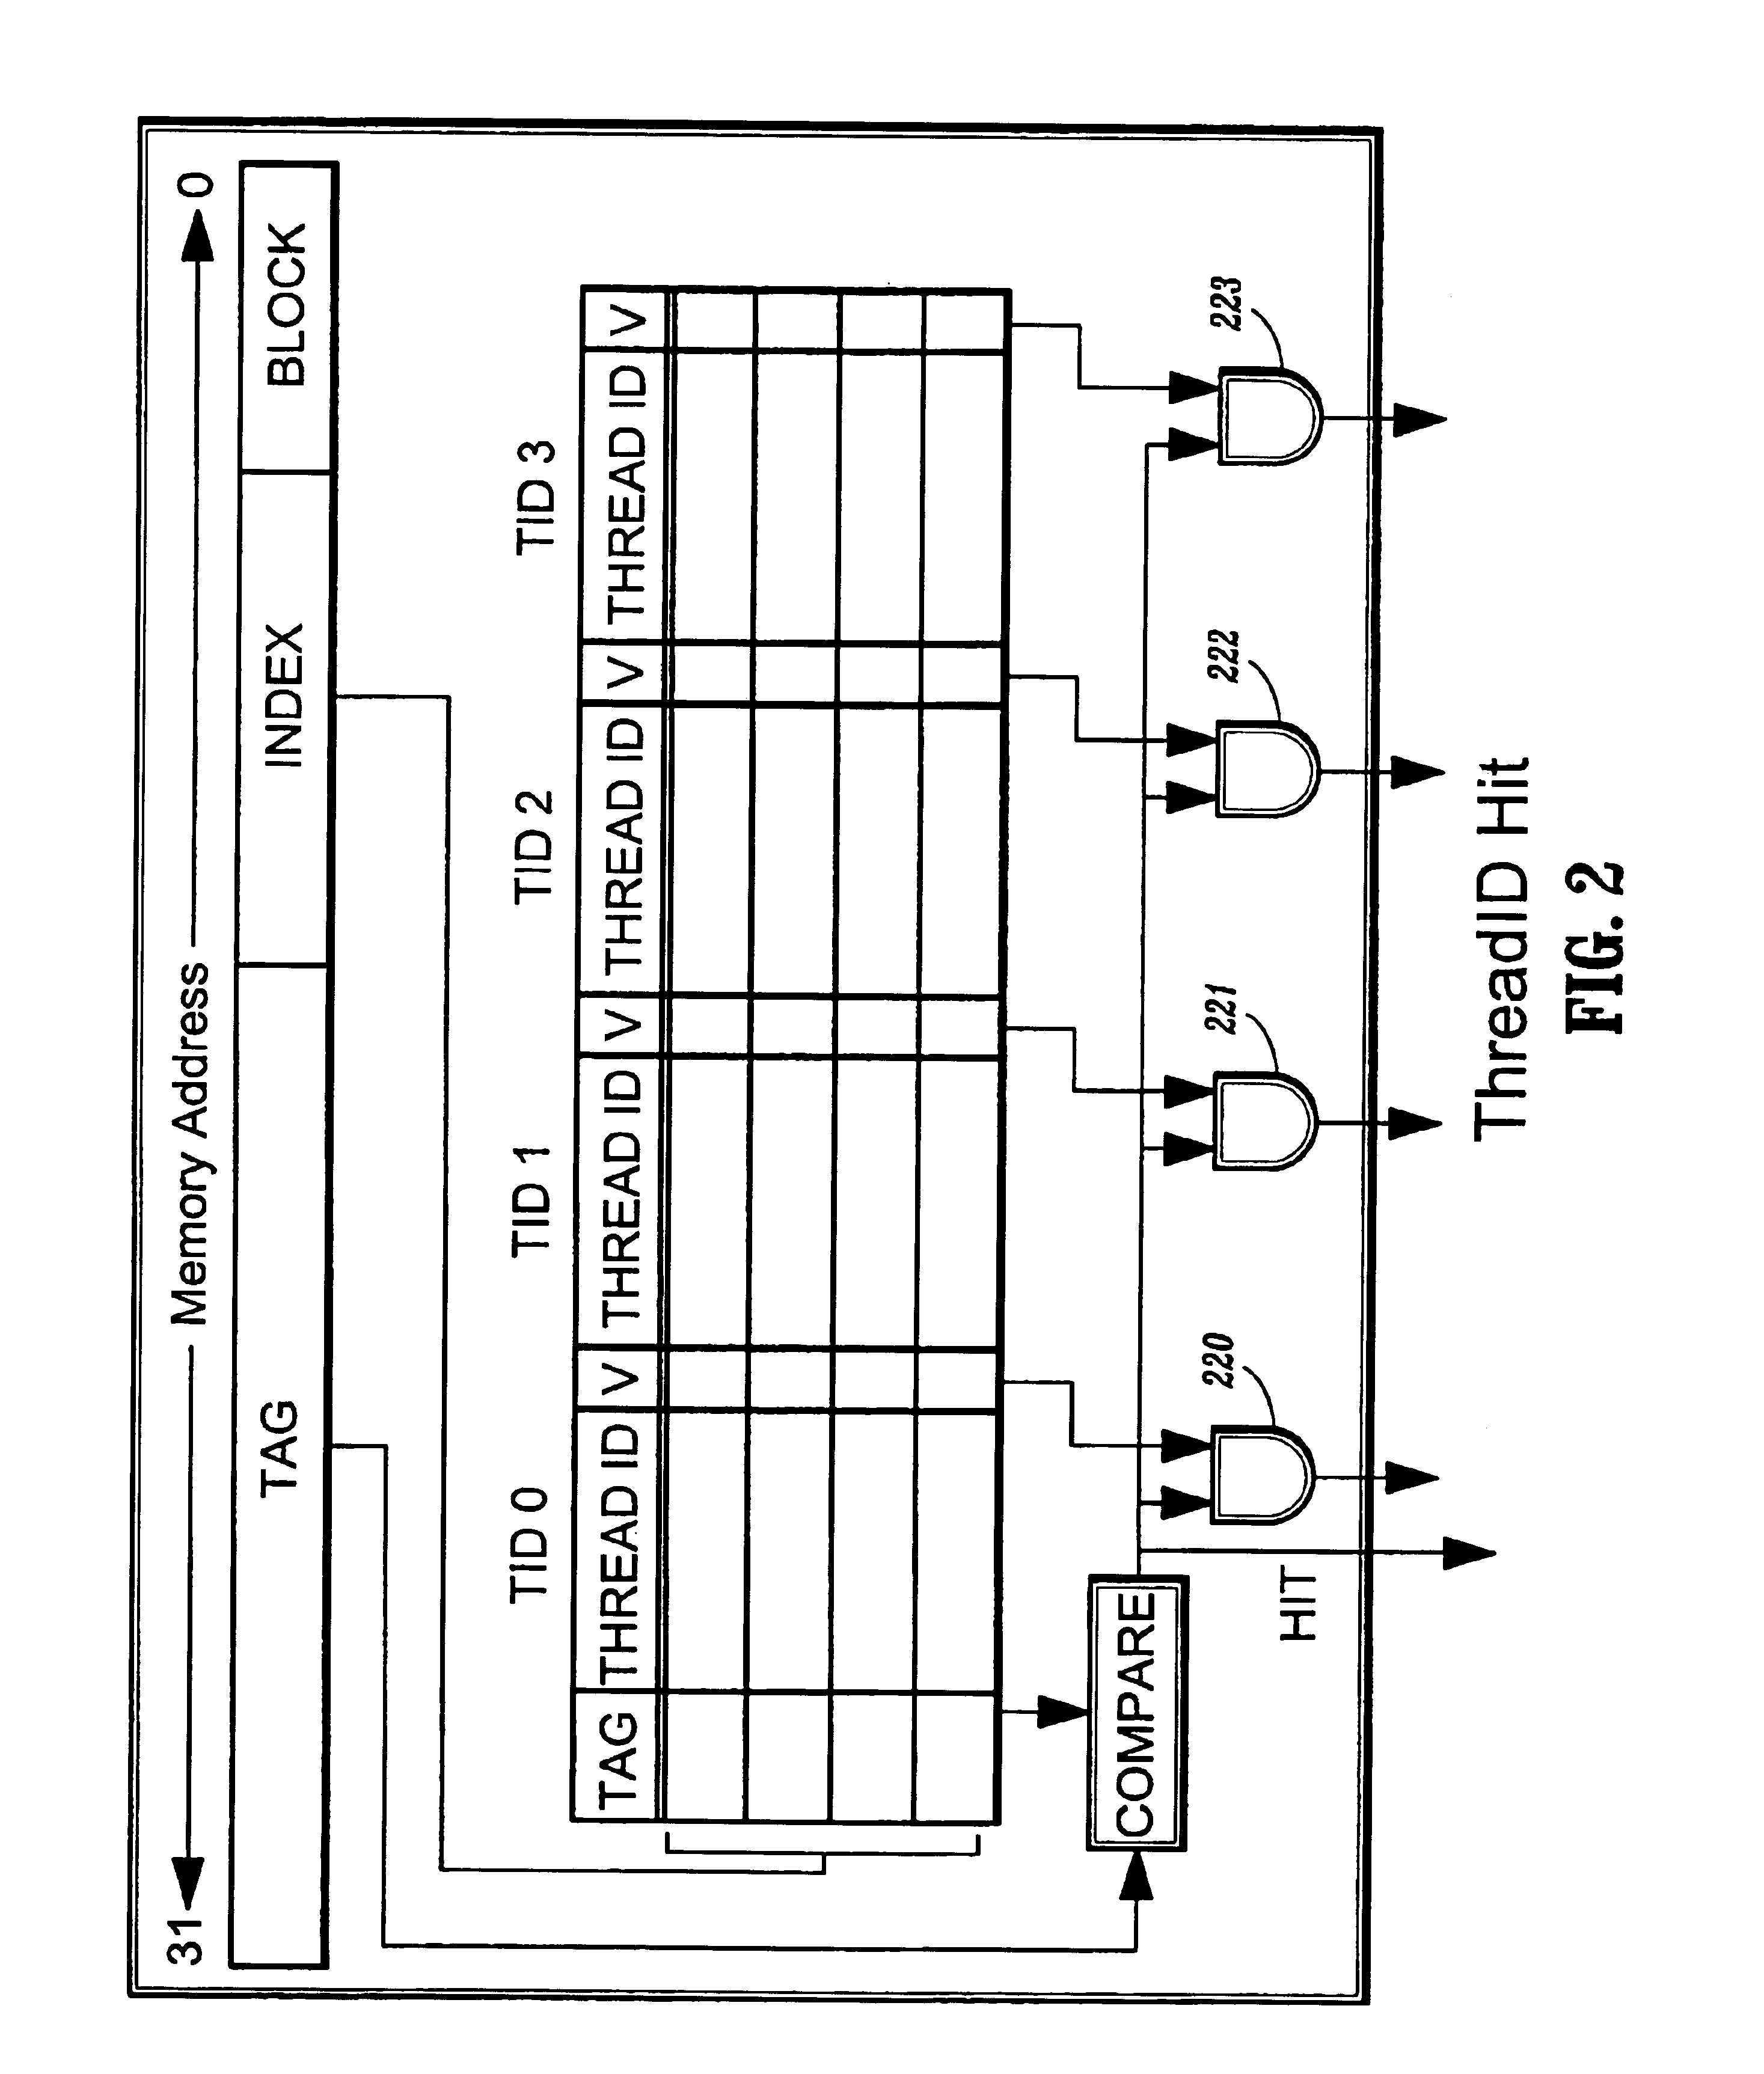 Hardware-assisted method for scheduling threads using data cache locality